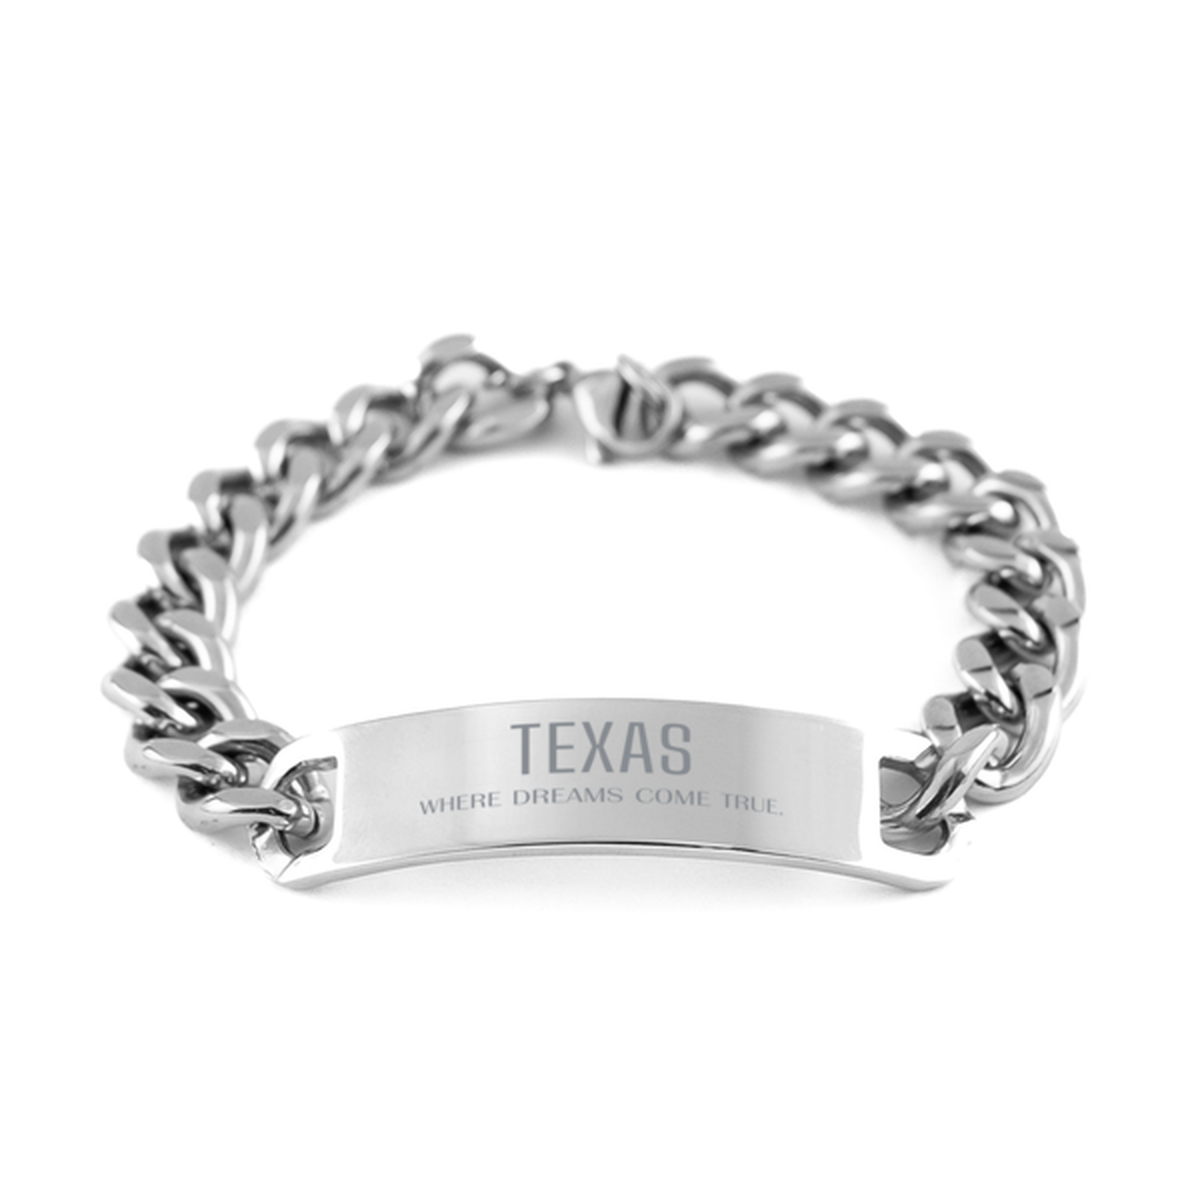 Love Texas State Cuban Chain Stainless Steel Bracelet, Texas Where dreams come true, Birthday Inspirational Gifts For Texas Men, Women, Friends